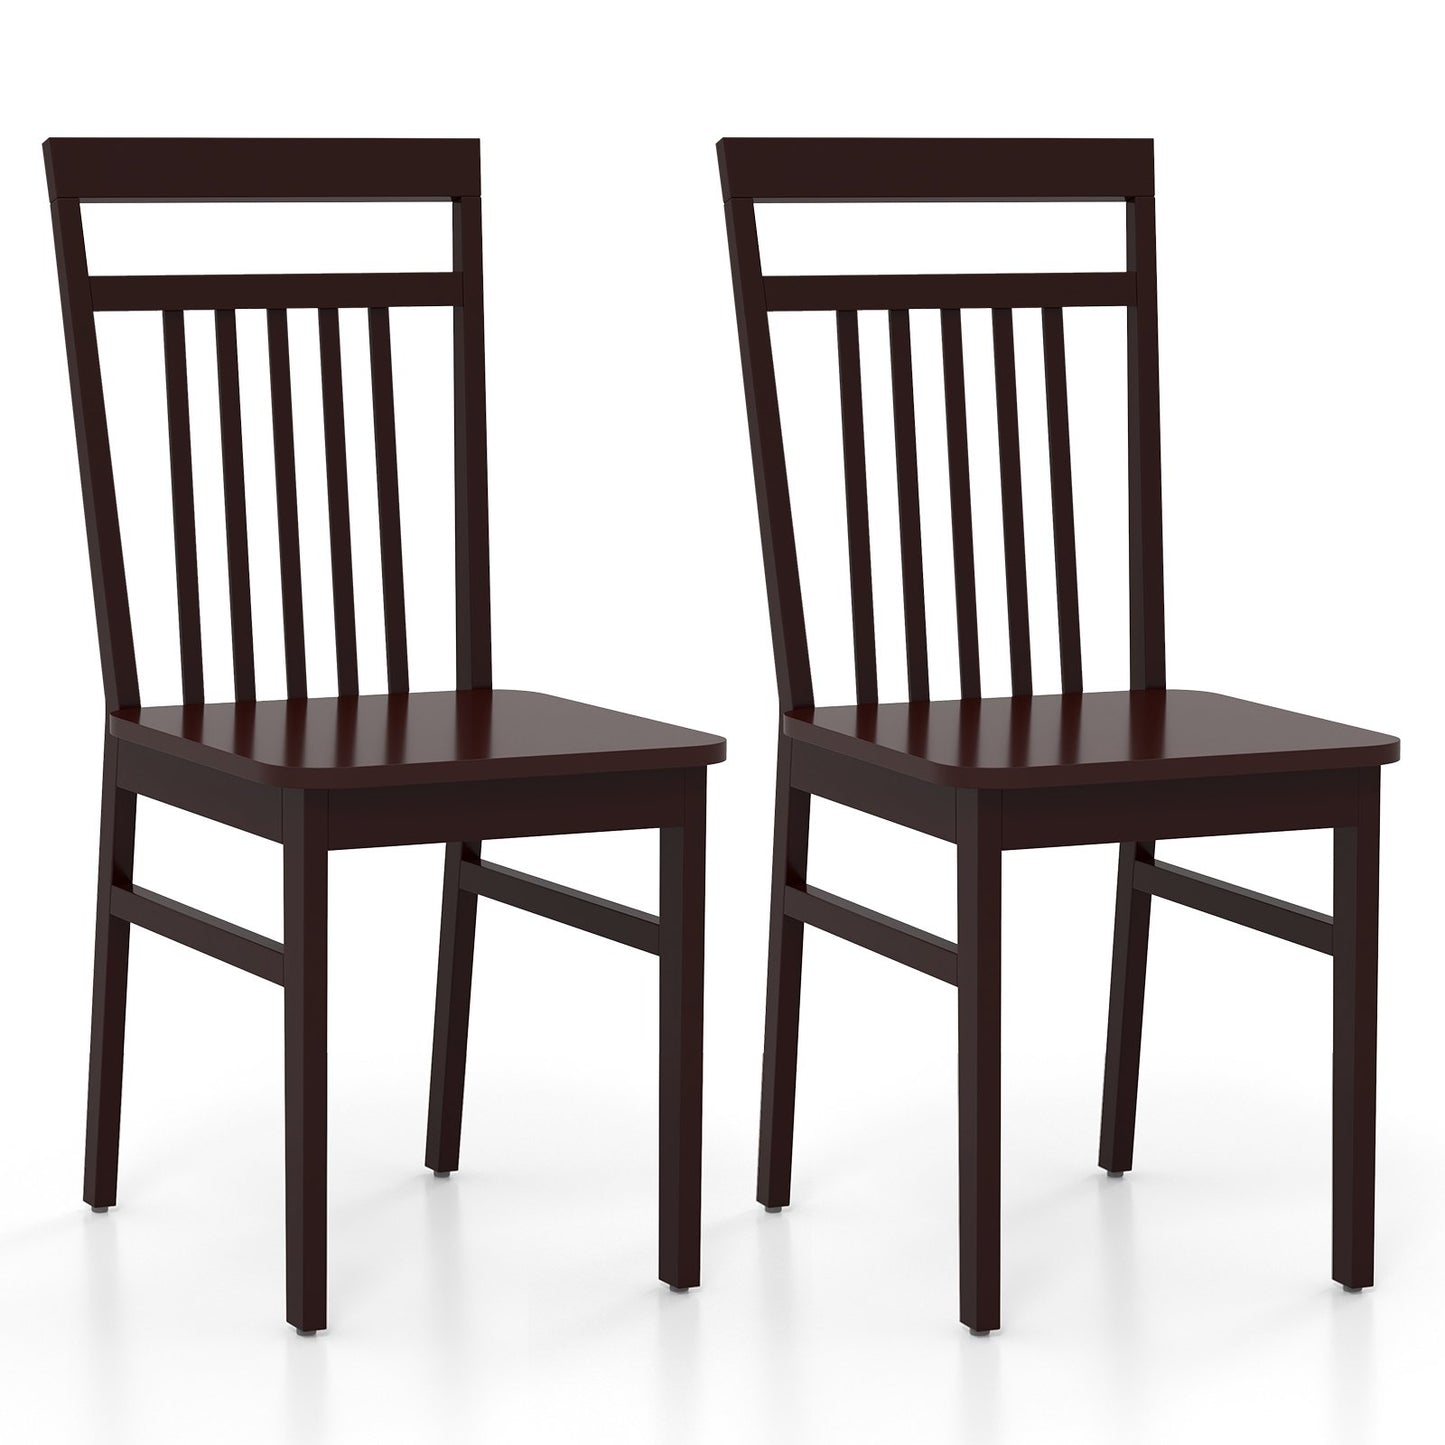 Set of 2 Farmhouse Dining Chair with Slanted High Backrest, Coffee at Gallery Canada